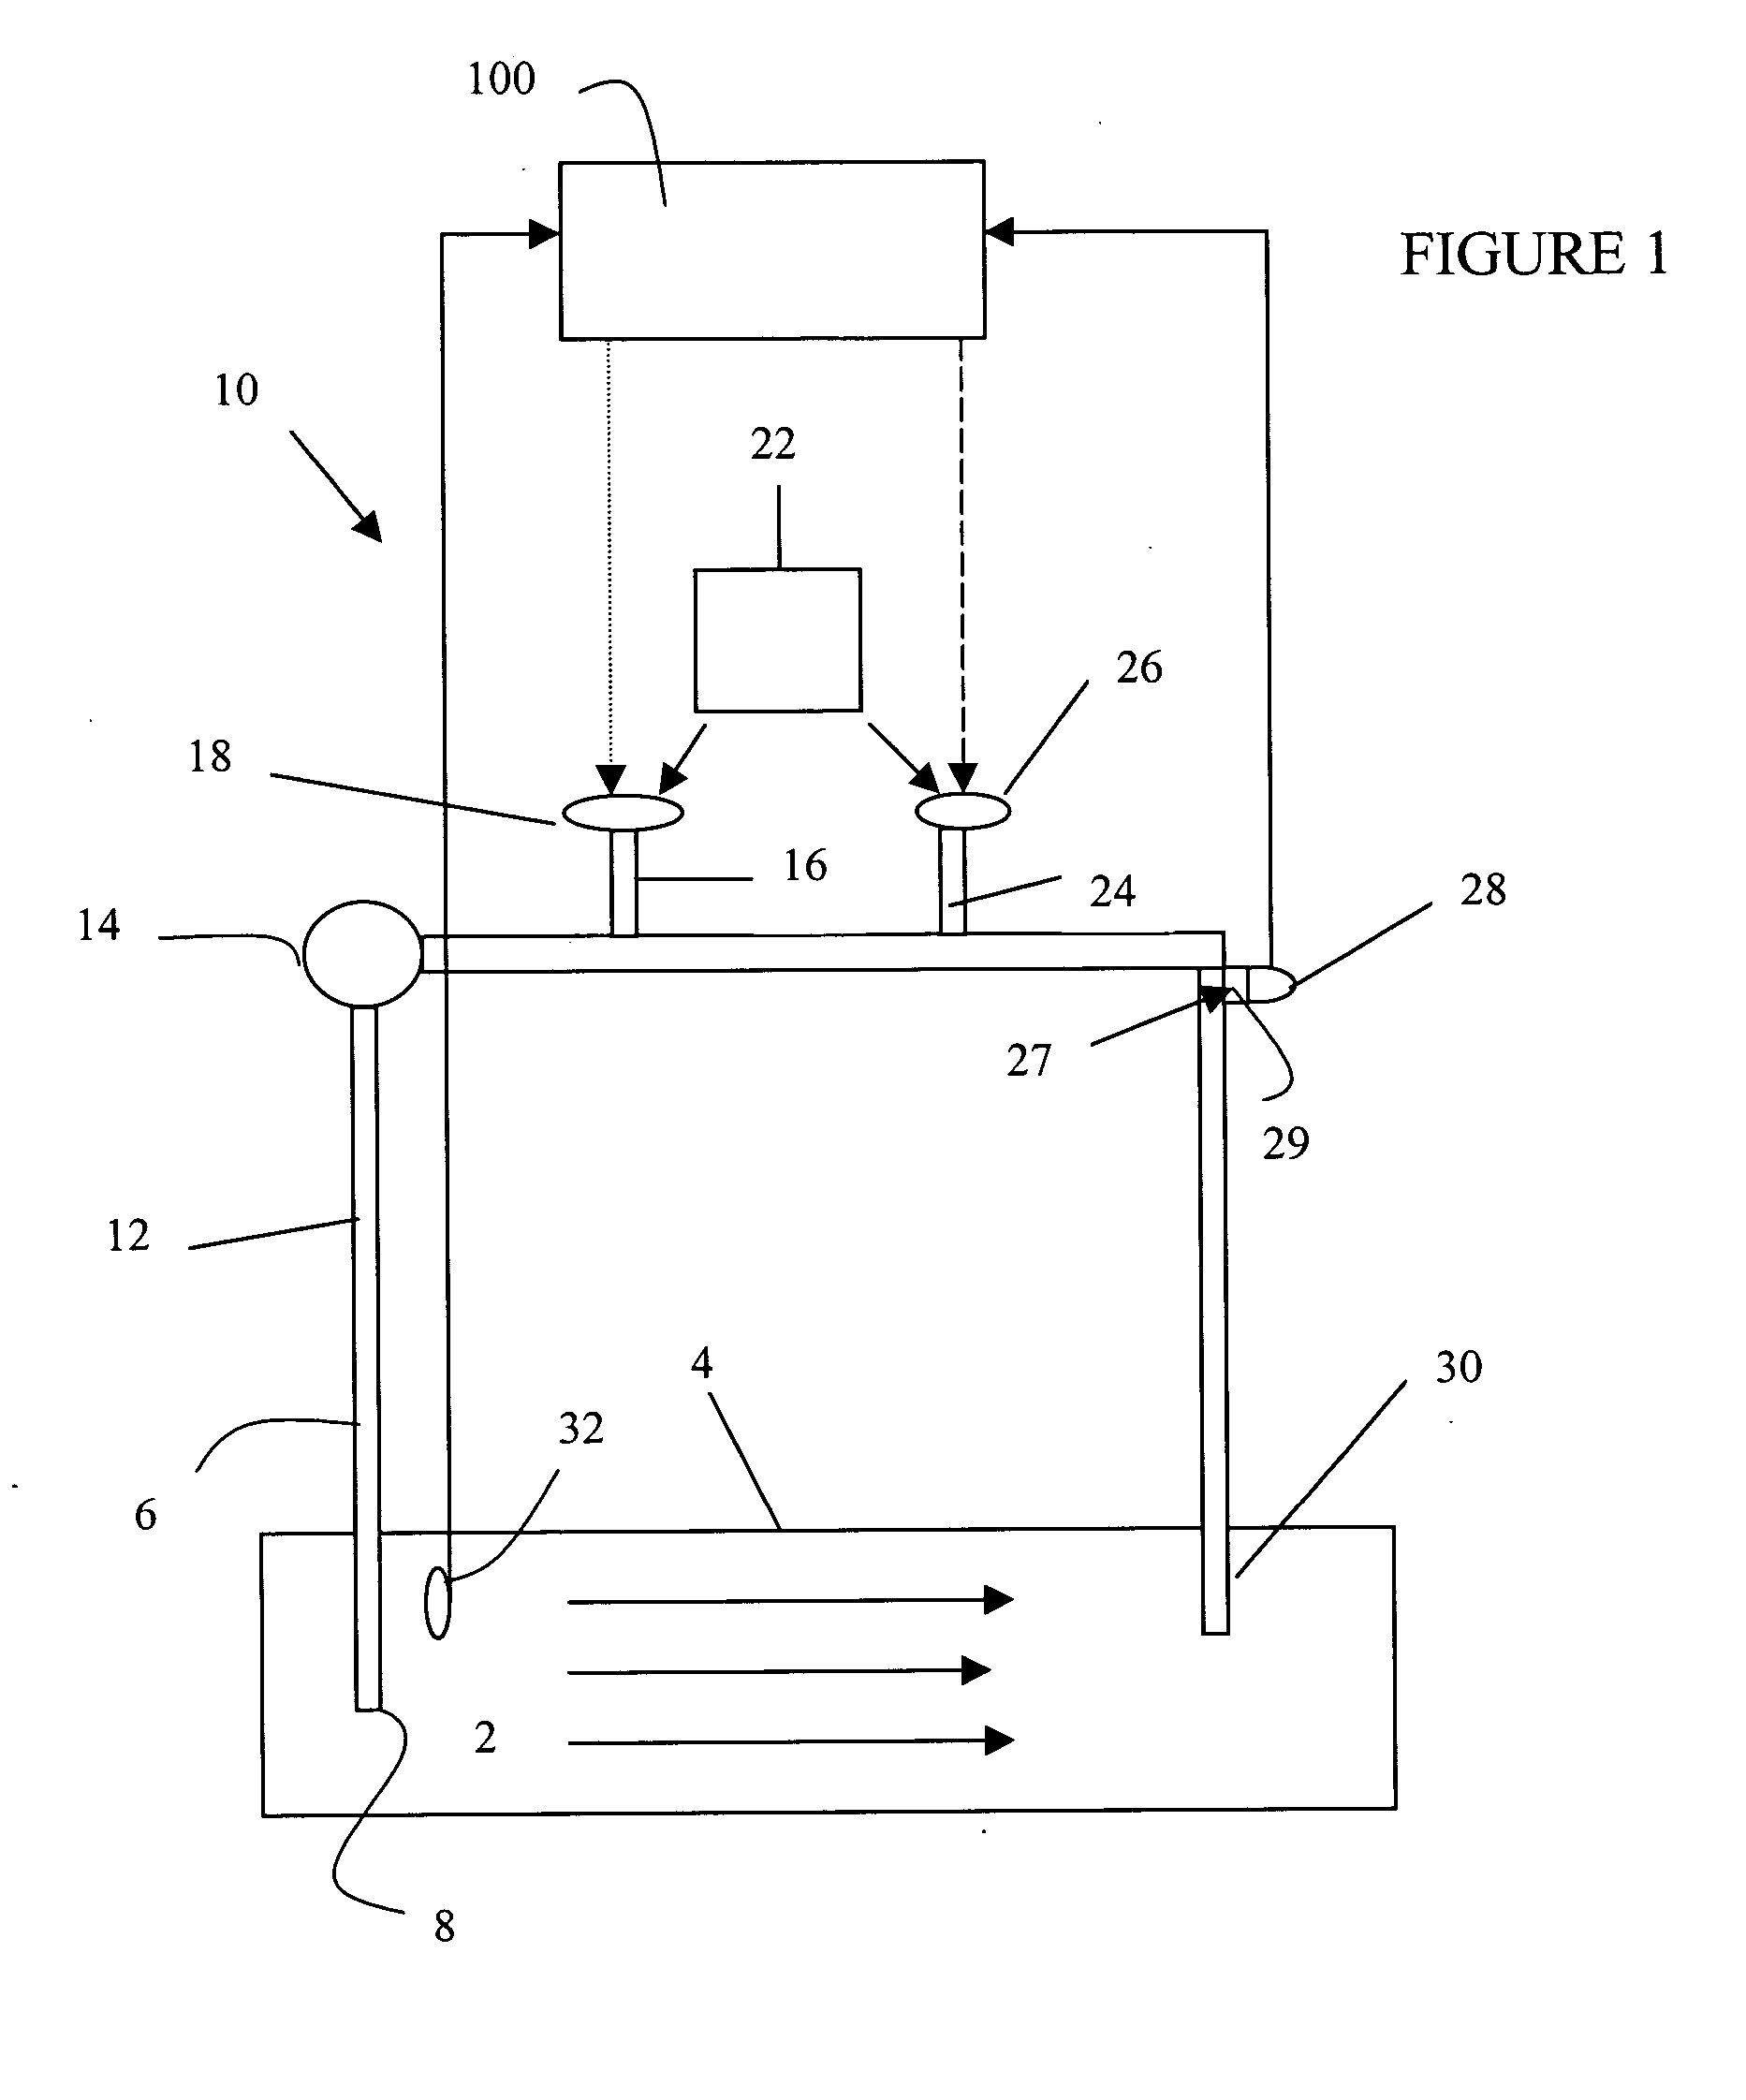 Methods and systems for improved dosing of a chemical treatment, such as chlorine dioxide, into a fluid stream, such as a wastewater stream